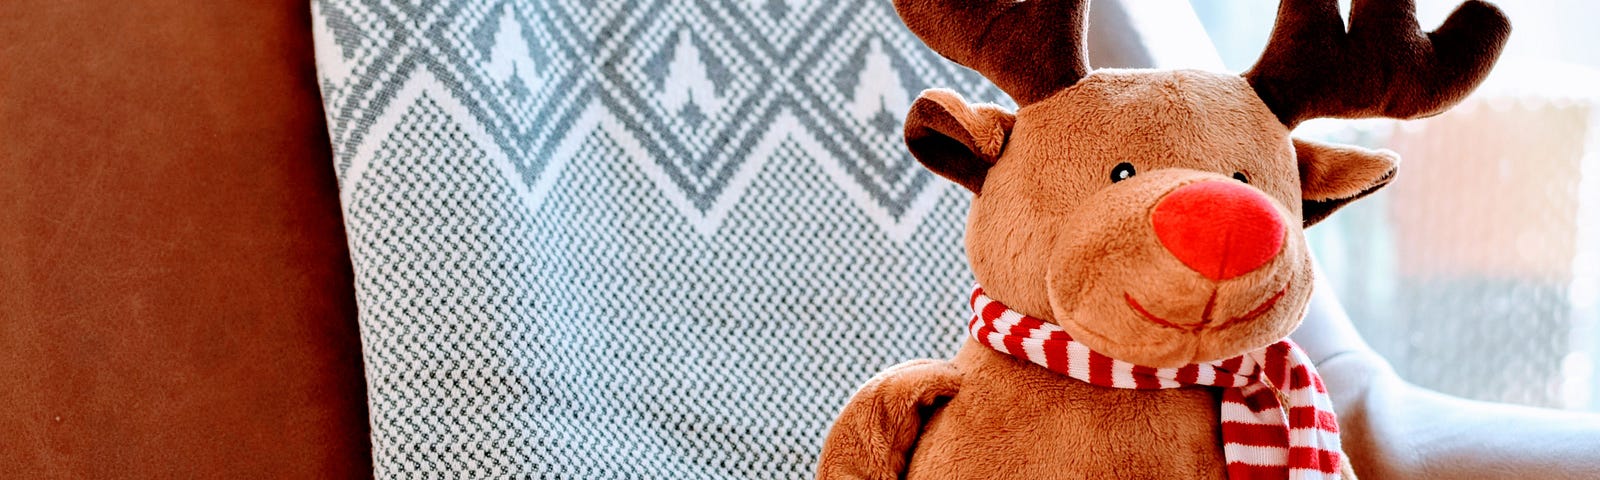 moose stuffie with a red and white striped scarf and a red nose.